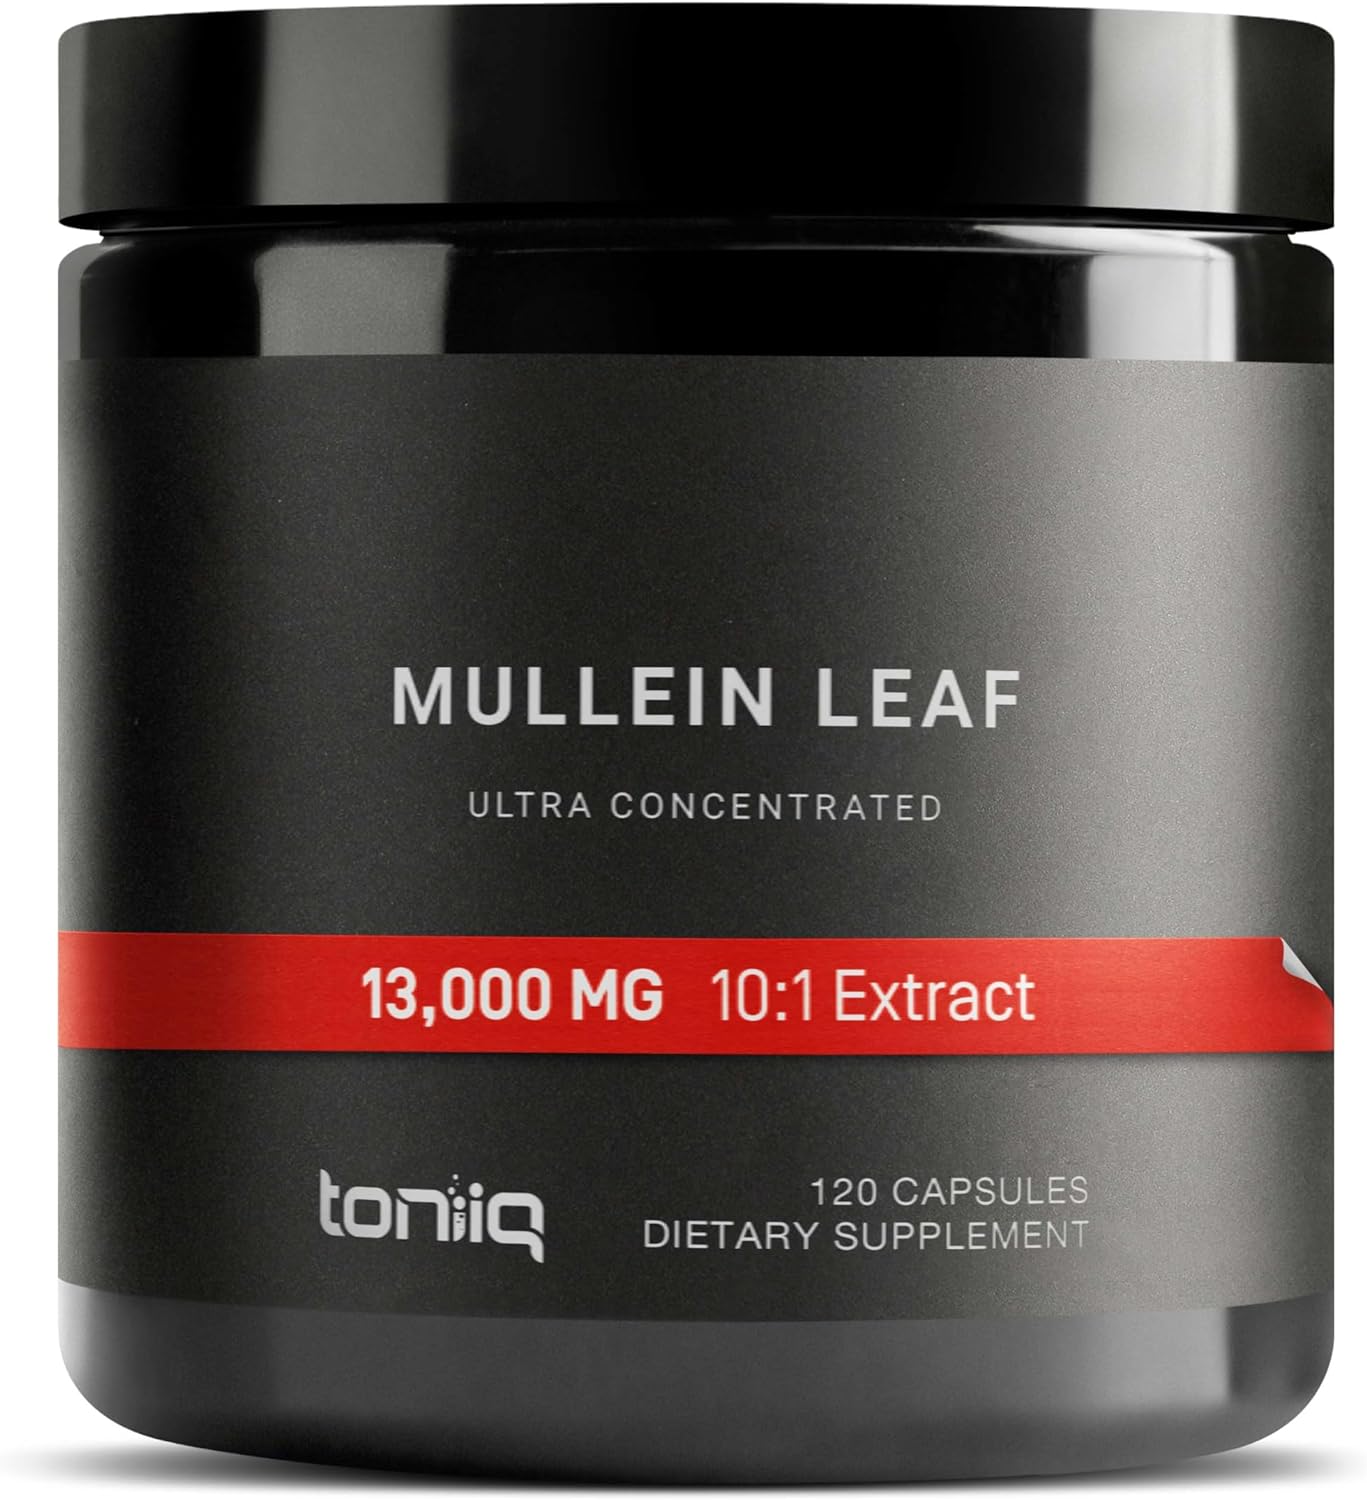 13,000mg Mullein Leaf Capsules - 10:1 Ultra Concentrated Mullein - Thi